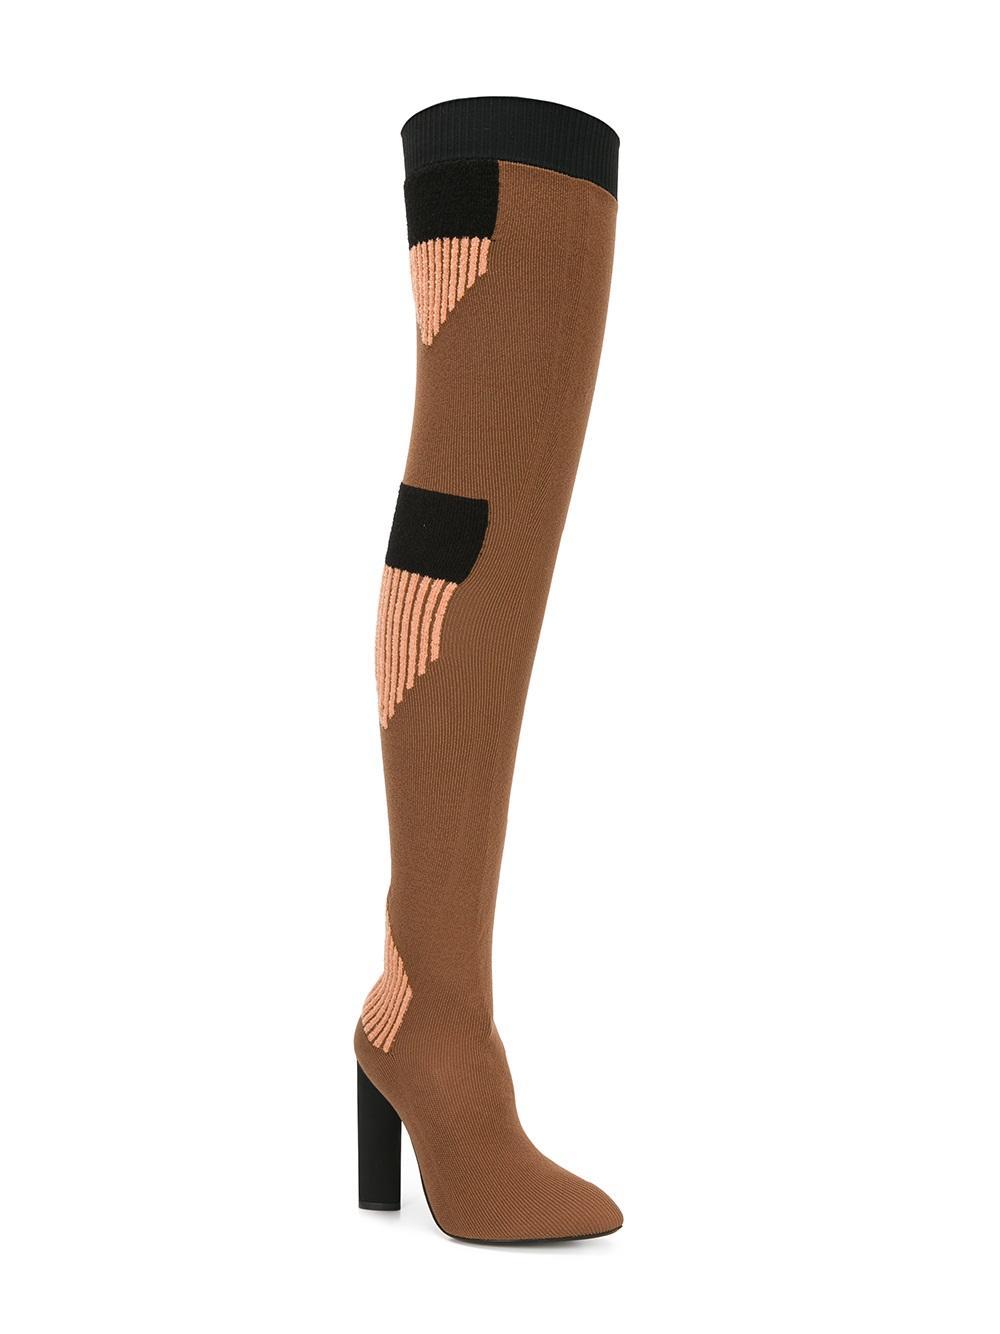 Lyst - Yeezy Season 3 Over-The-Knee Sock Boots in Brown